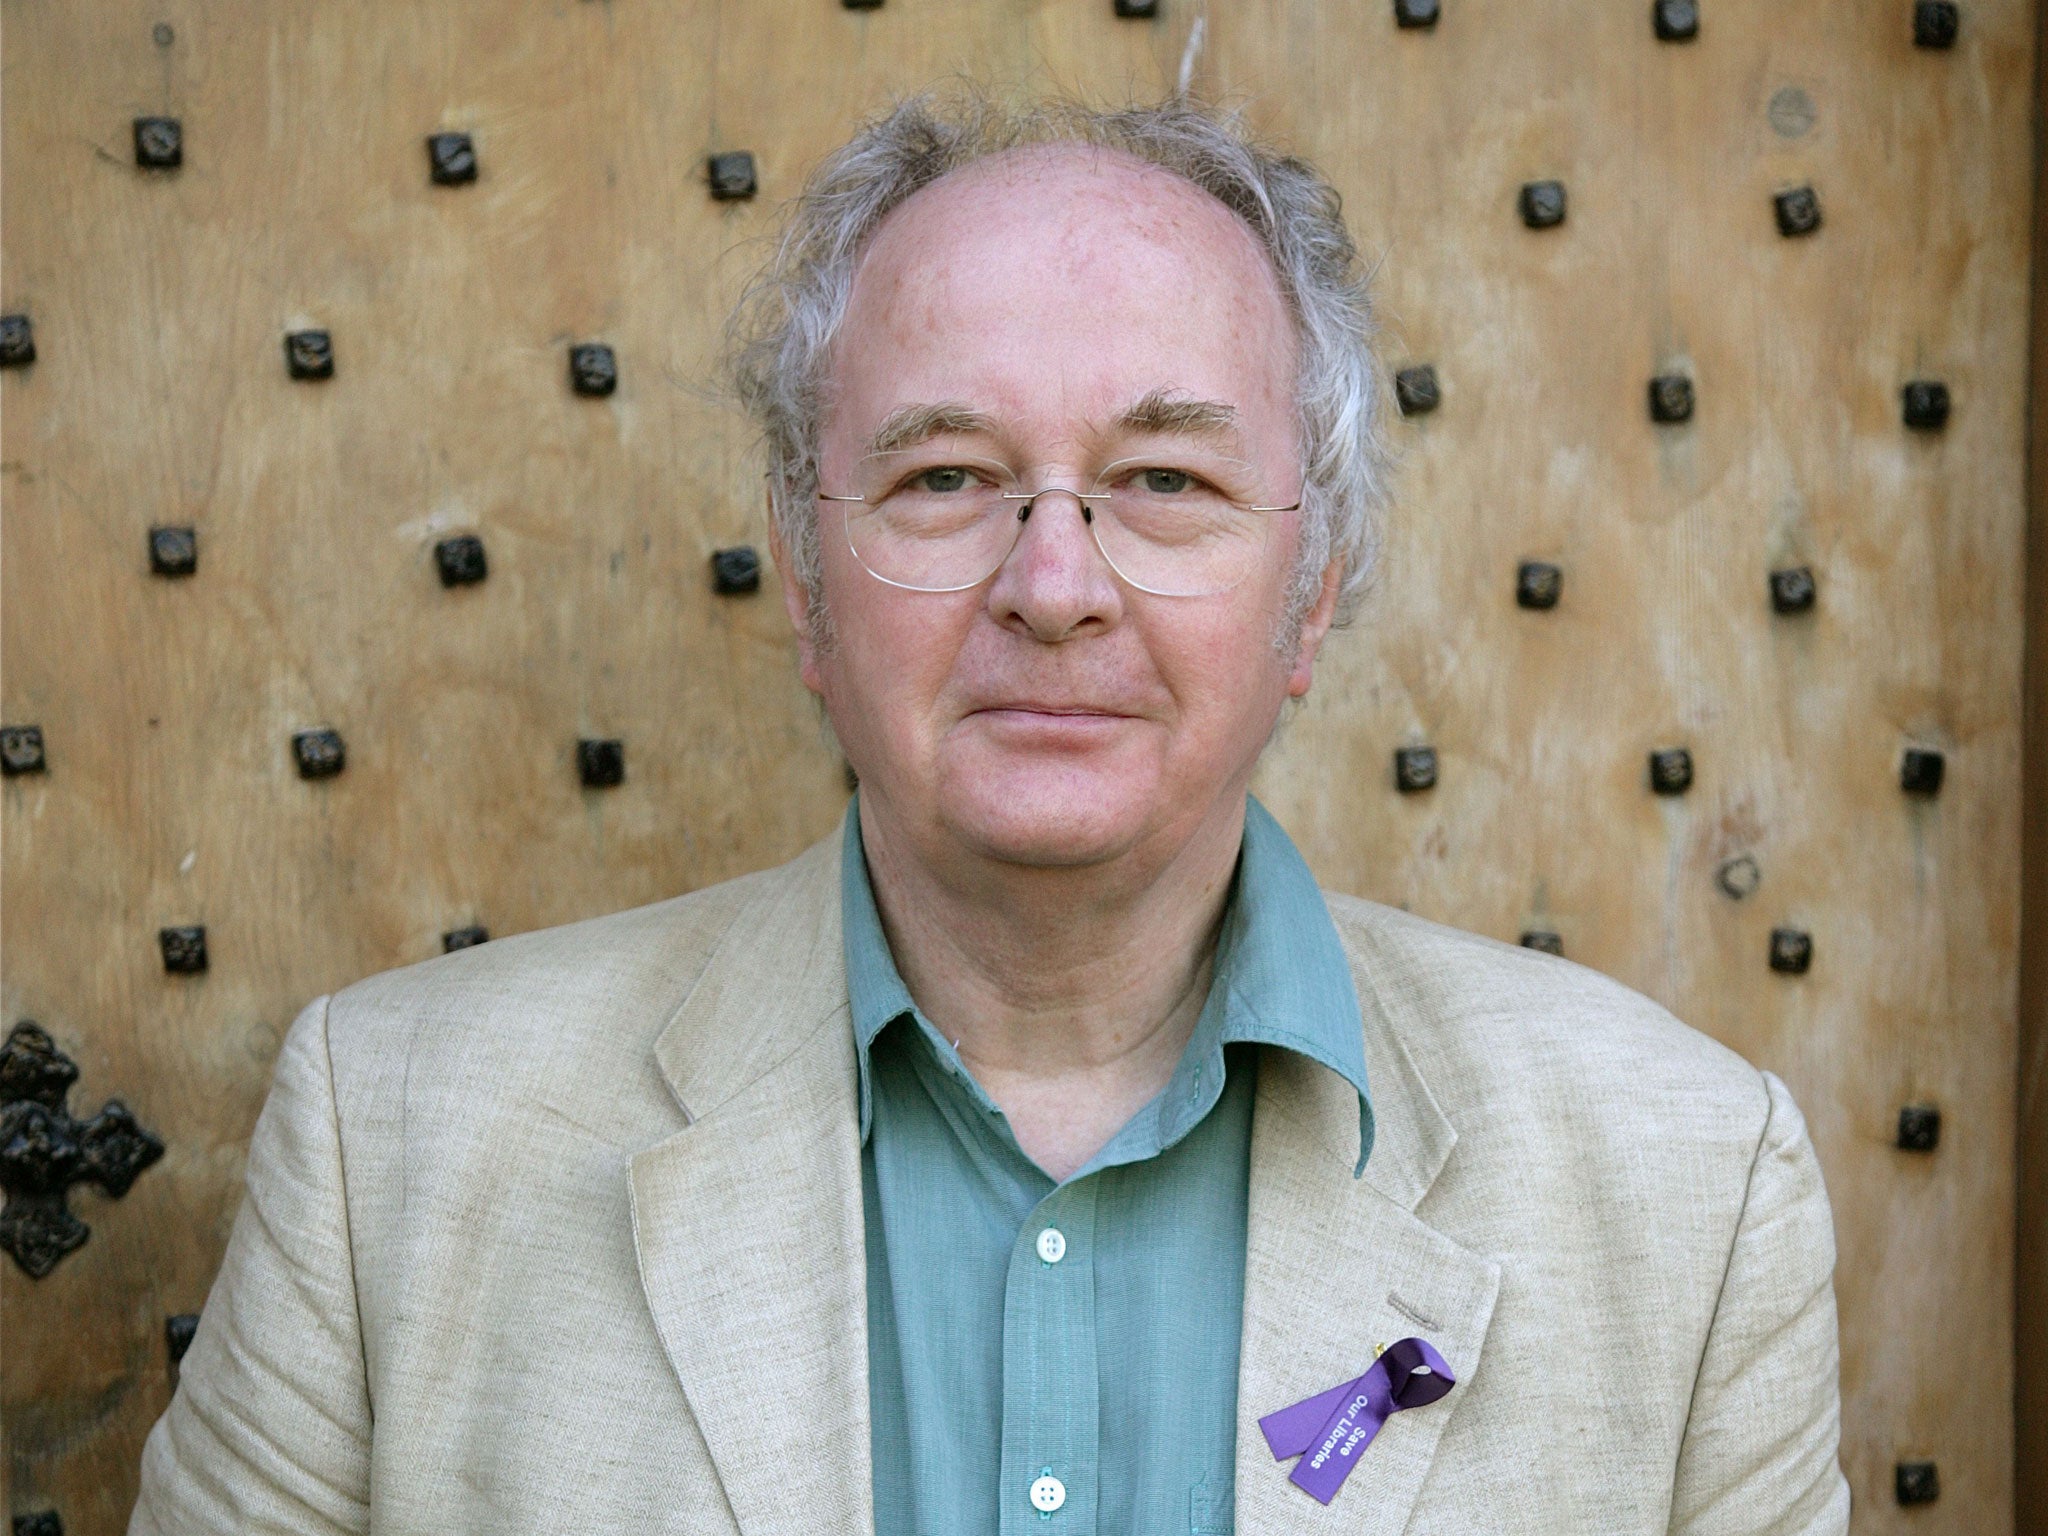 Philip Pullman said the new law amounted to 'one of the most disgusting, mean, vindictive acts of a barbaric government'